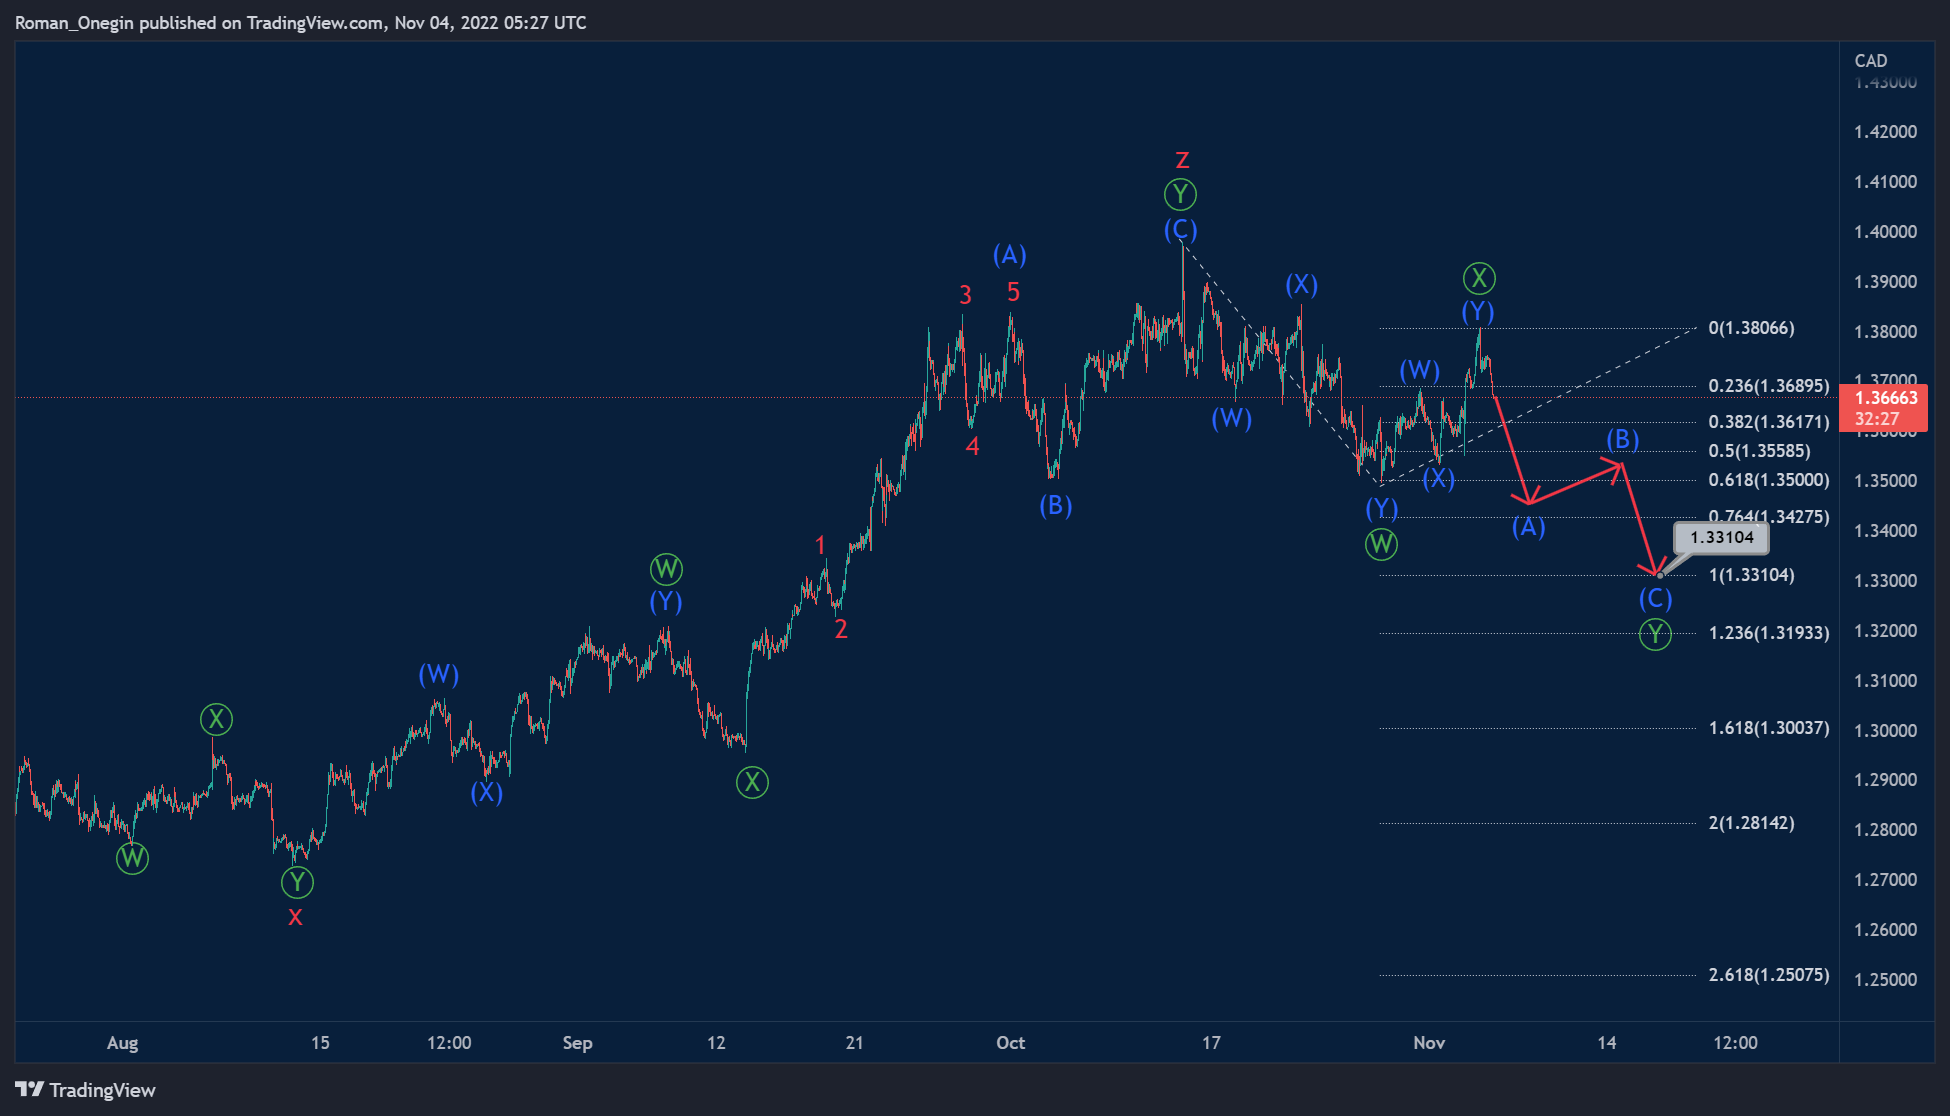 The current USDCAD chart shows the internal structure of a large correction pattern, which most likely takes the form of a cycle triple zigzag w-x-y-x-z - 2